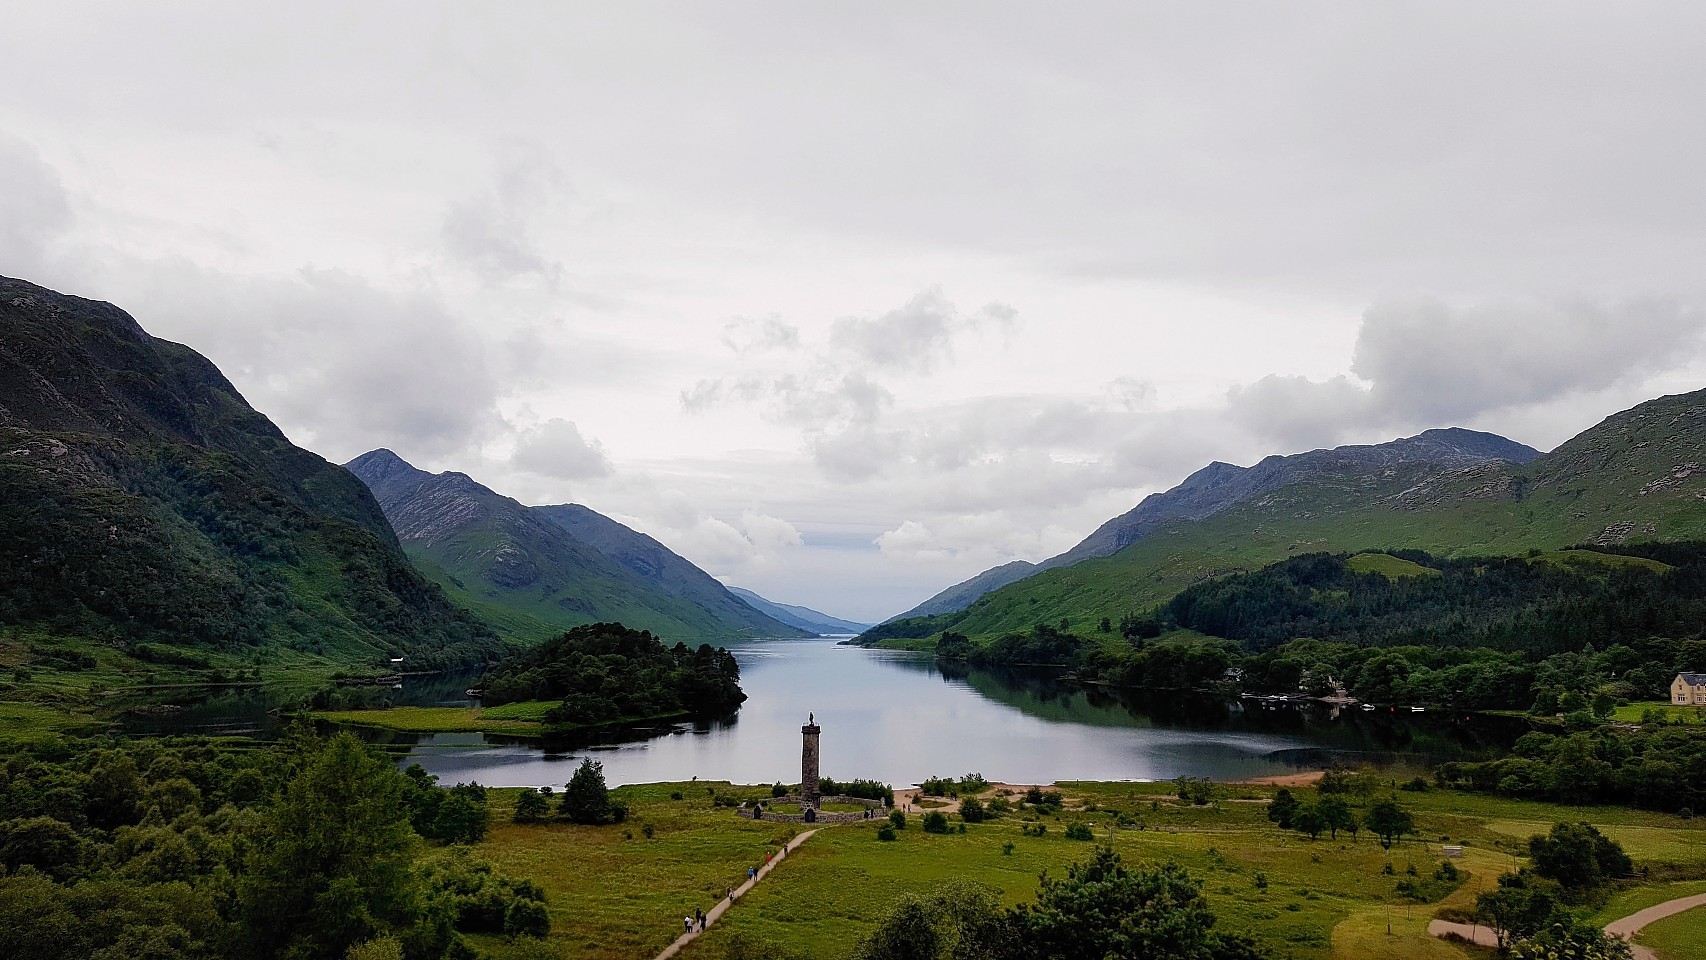 A view of the Glenfinnan Monument